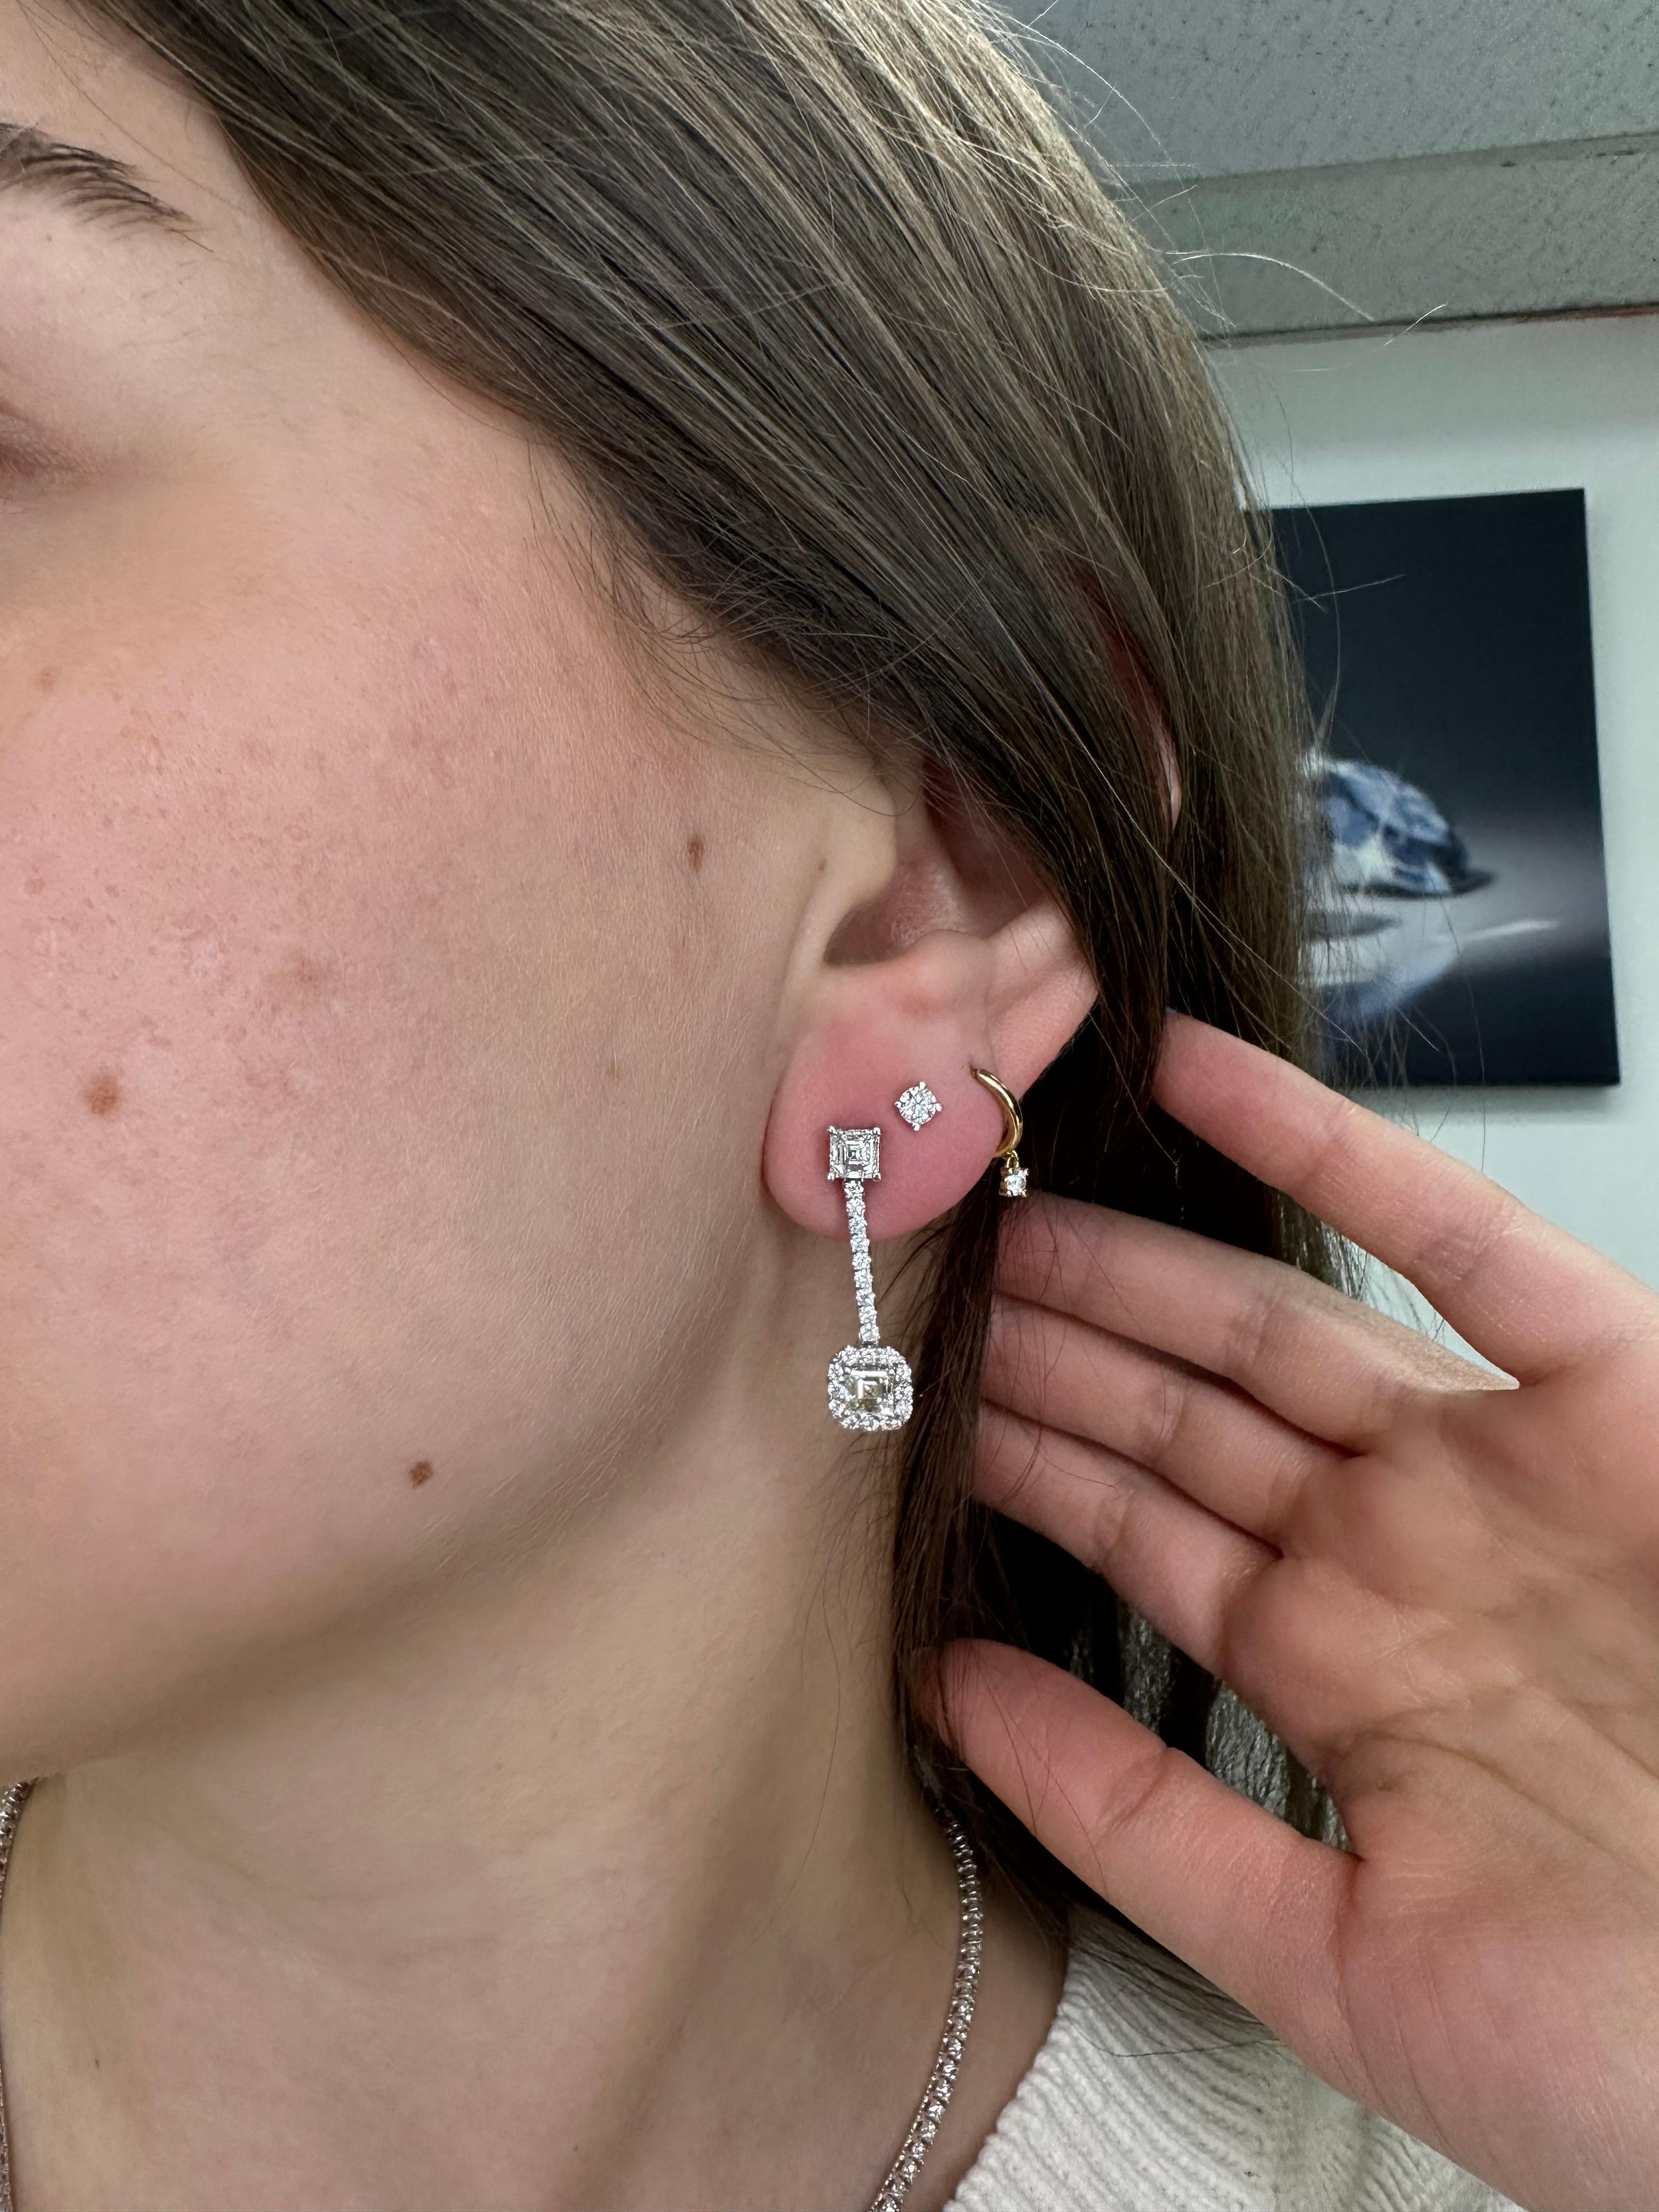 Gem Jewelers Co. has crafted a pair of Asscher & Round Cut Dangling Diamond Earrings that are the epitome of elegance and luxury. These exquisite Earrings showcase the timeless beauty of fine jewelry.

With a total weight of 1.65 Carat, each Earring